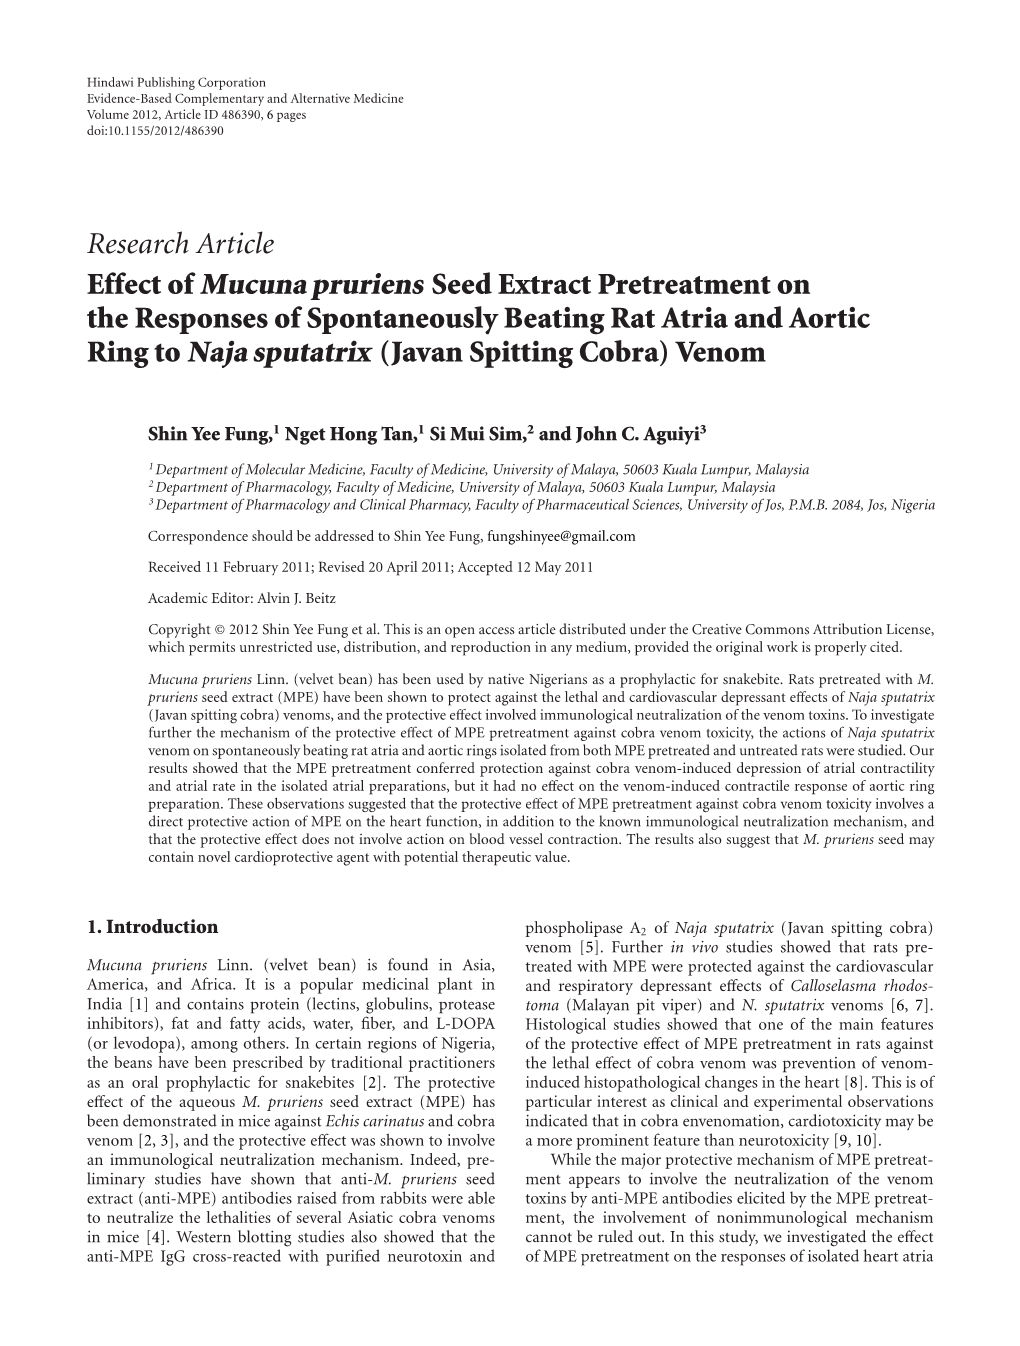 Effect of Mucuna Pruriens Seed Extract Pretreatment on the Responses of Spontaneously Beating Rat Atria and Aortic Ring to Naja Sputatrix (Javan Spitting Cobra) Venom